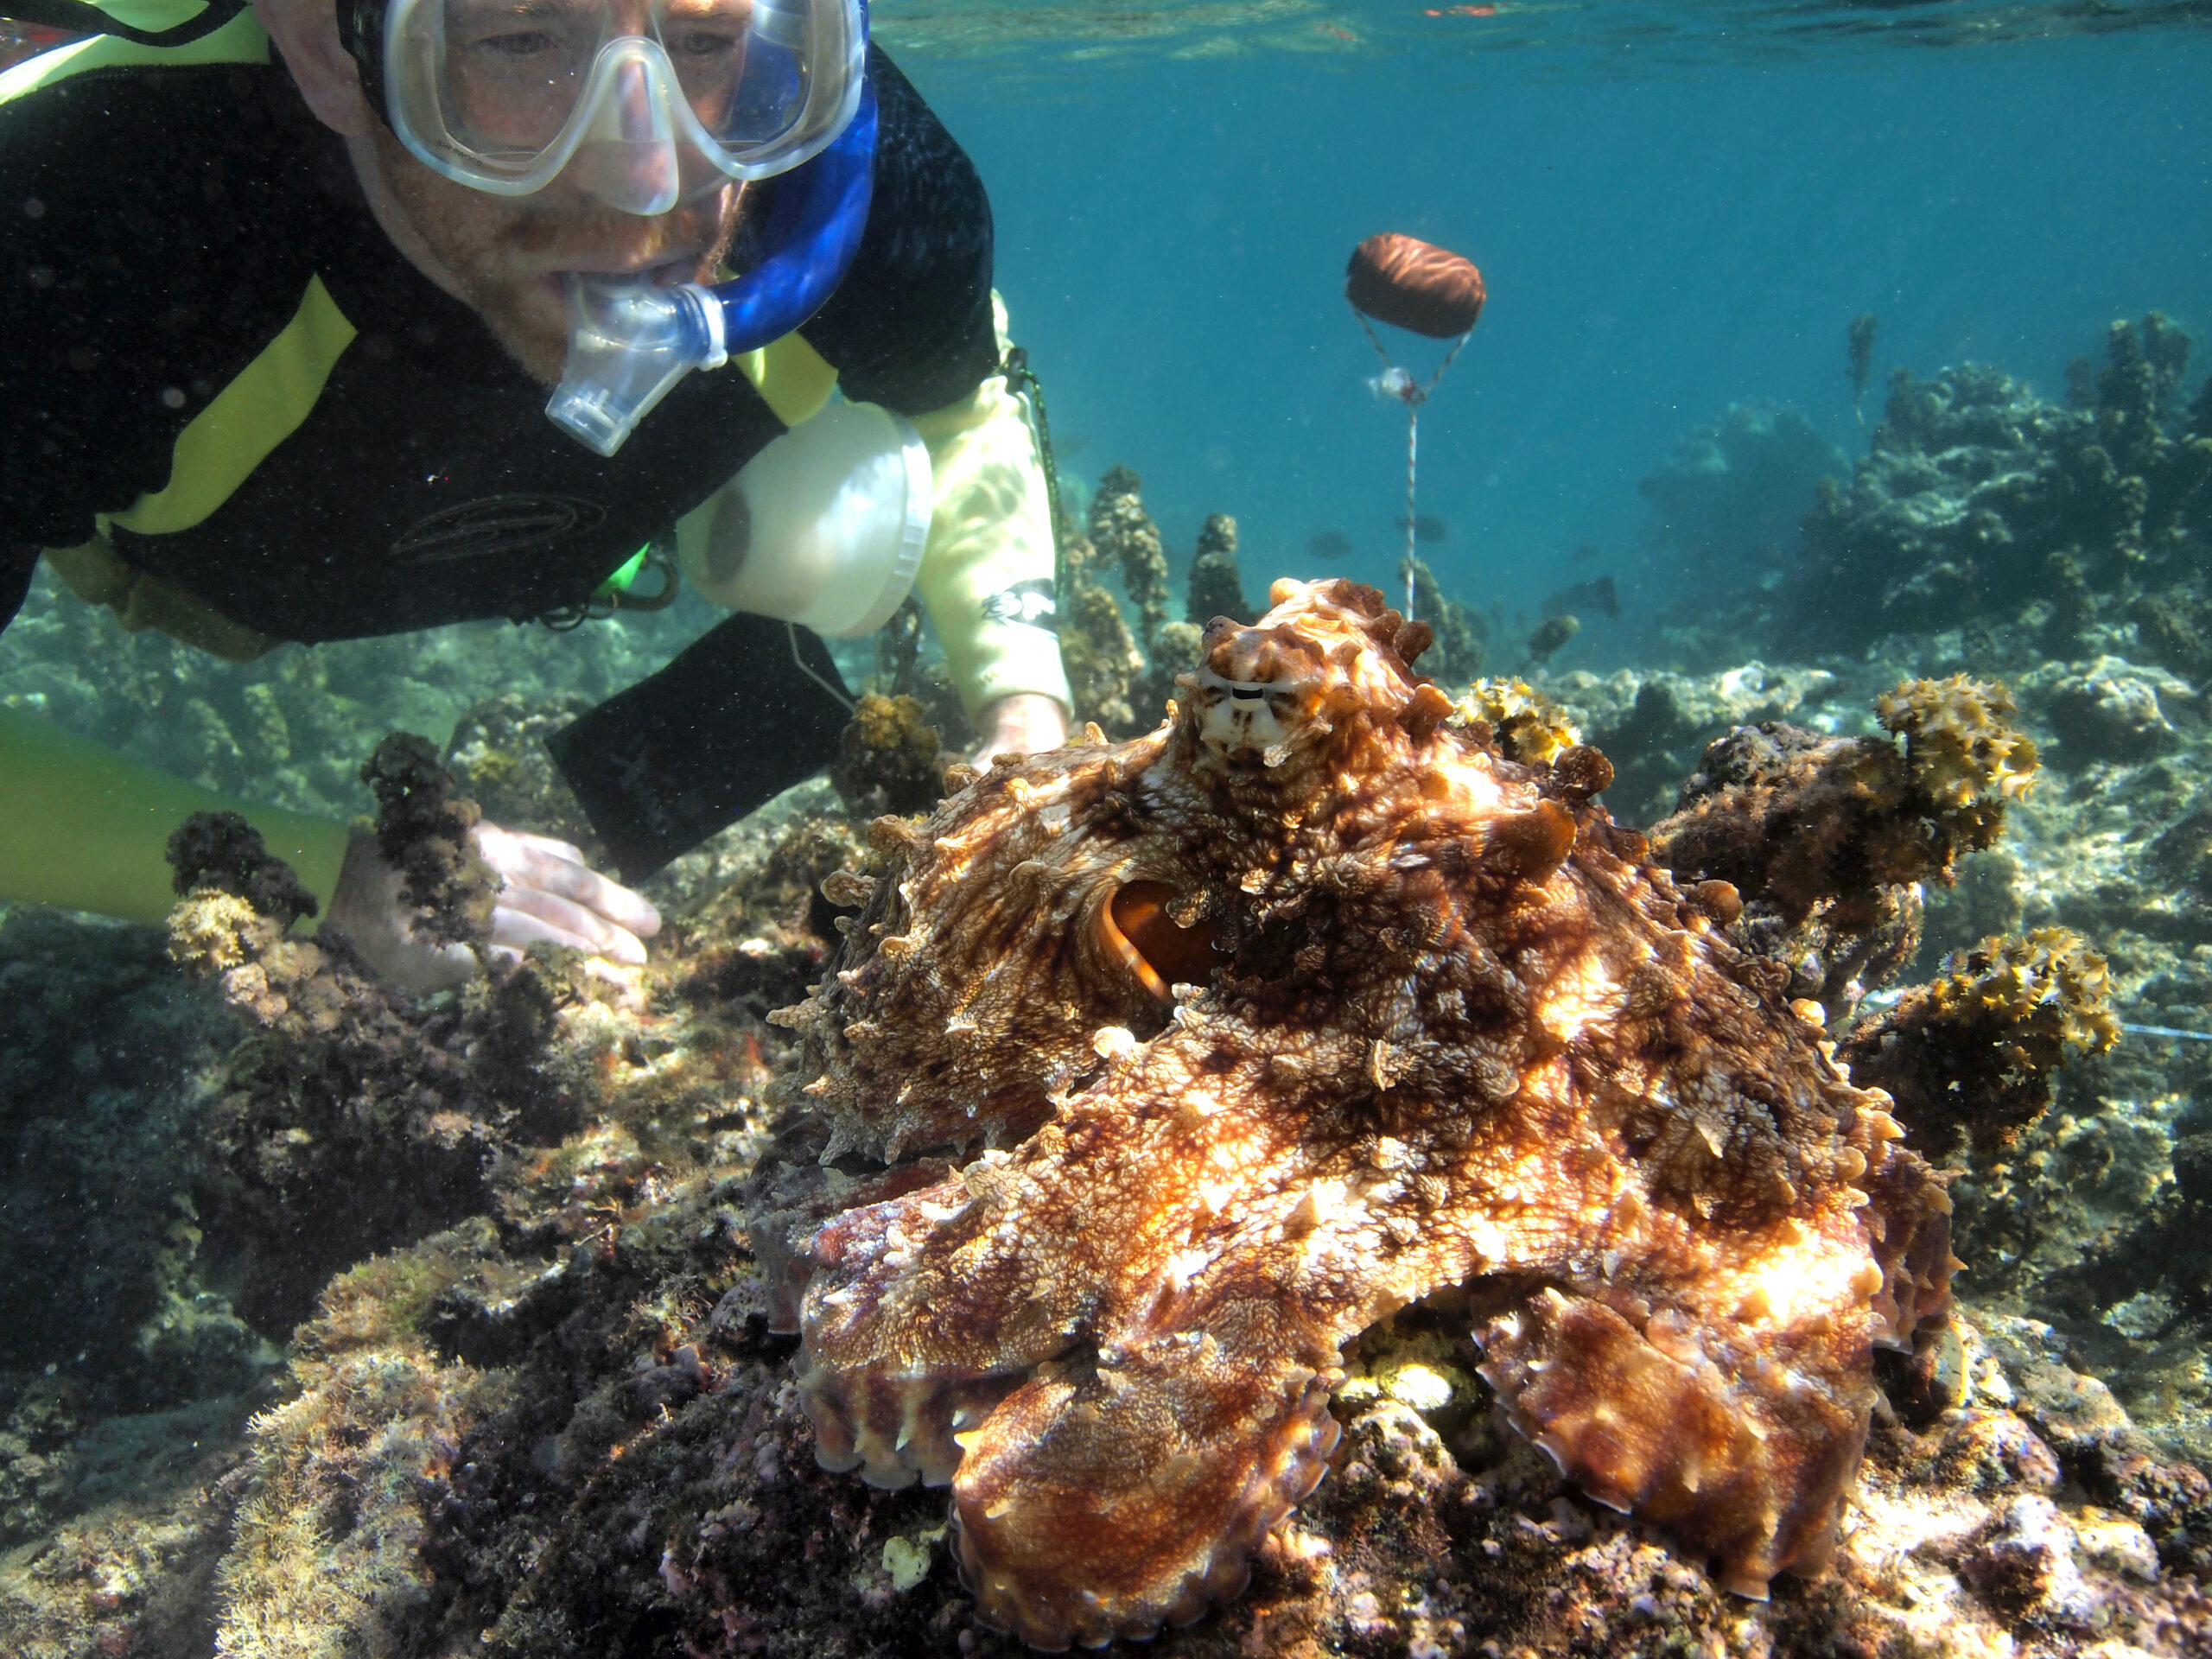 A man in dive gear and a snorkle mask examines and octopus underwater.